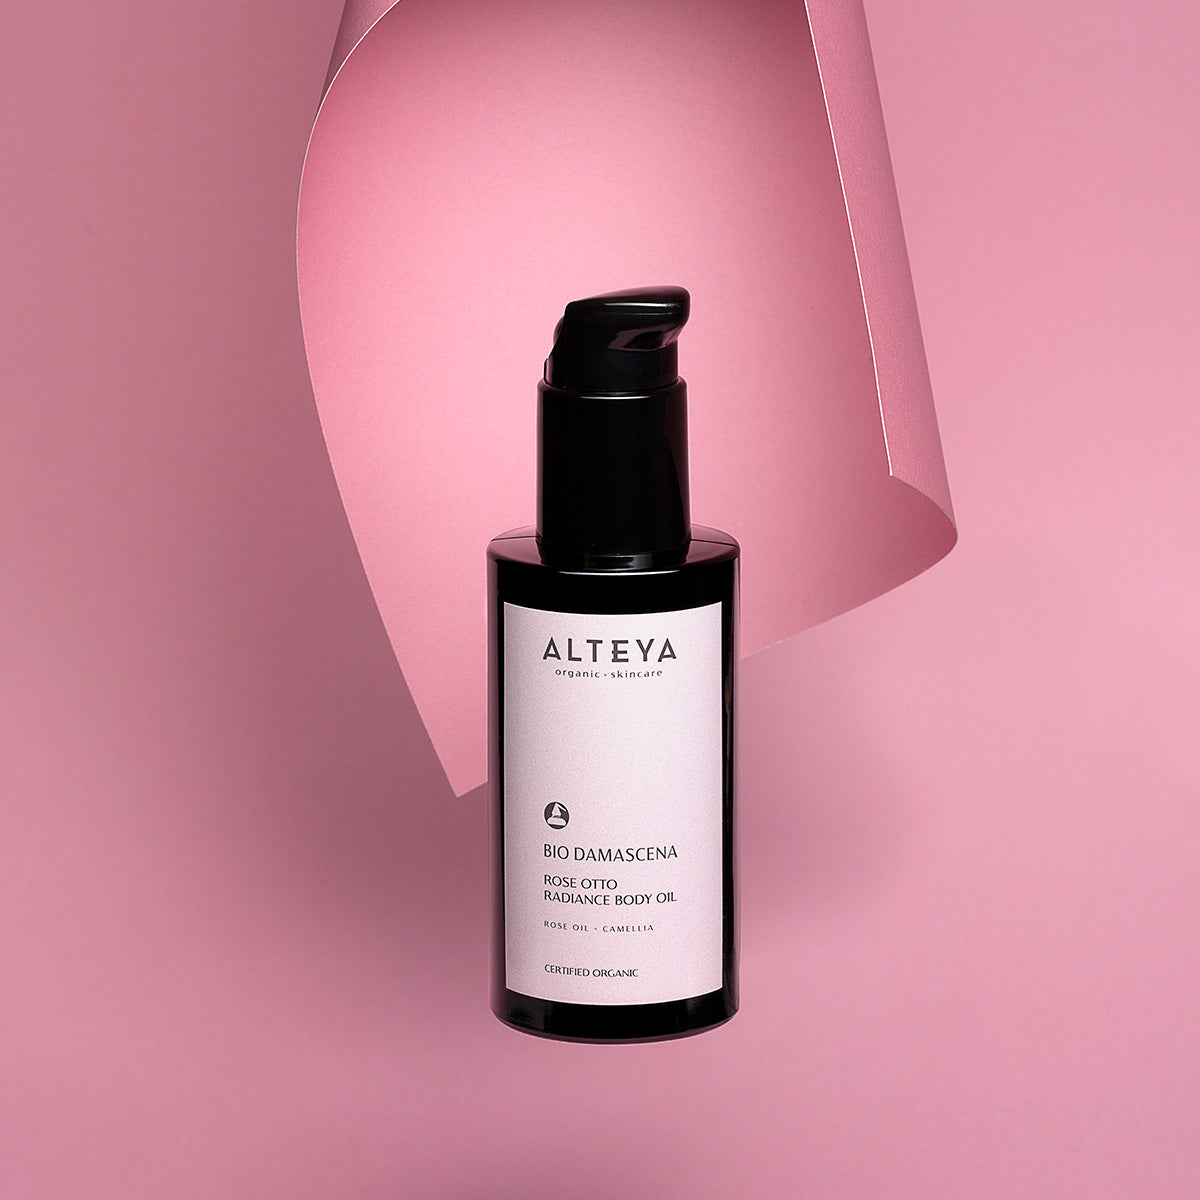 A bottle of Alteya Organics Bio Damascena Rose Otto Radiance Body Oil, rich in essential nutrients, on a pink background.